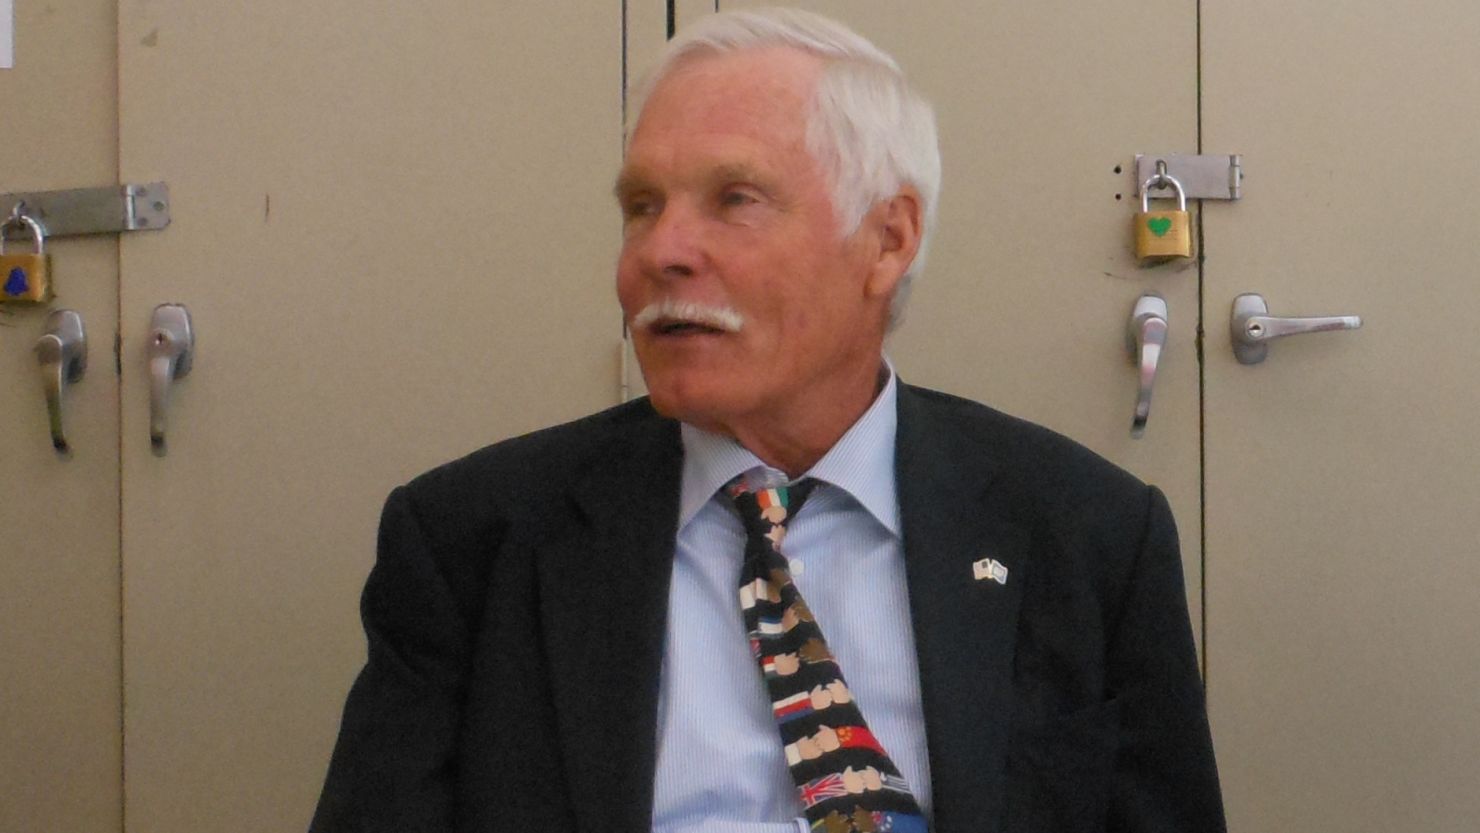 Ted Turner speaks to an audience Monday at the 92nd Street Y in New York City about energy options in the United States.